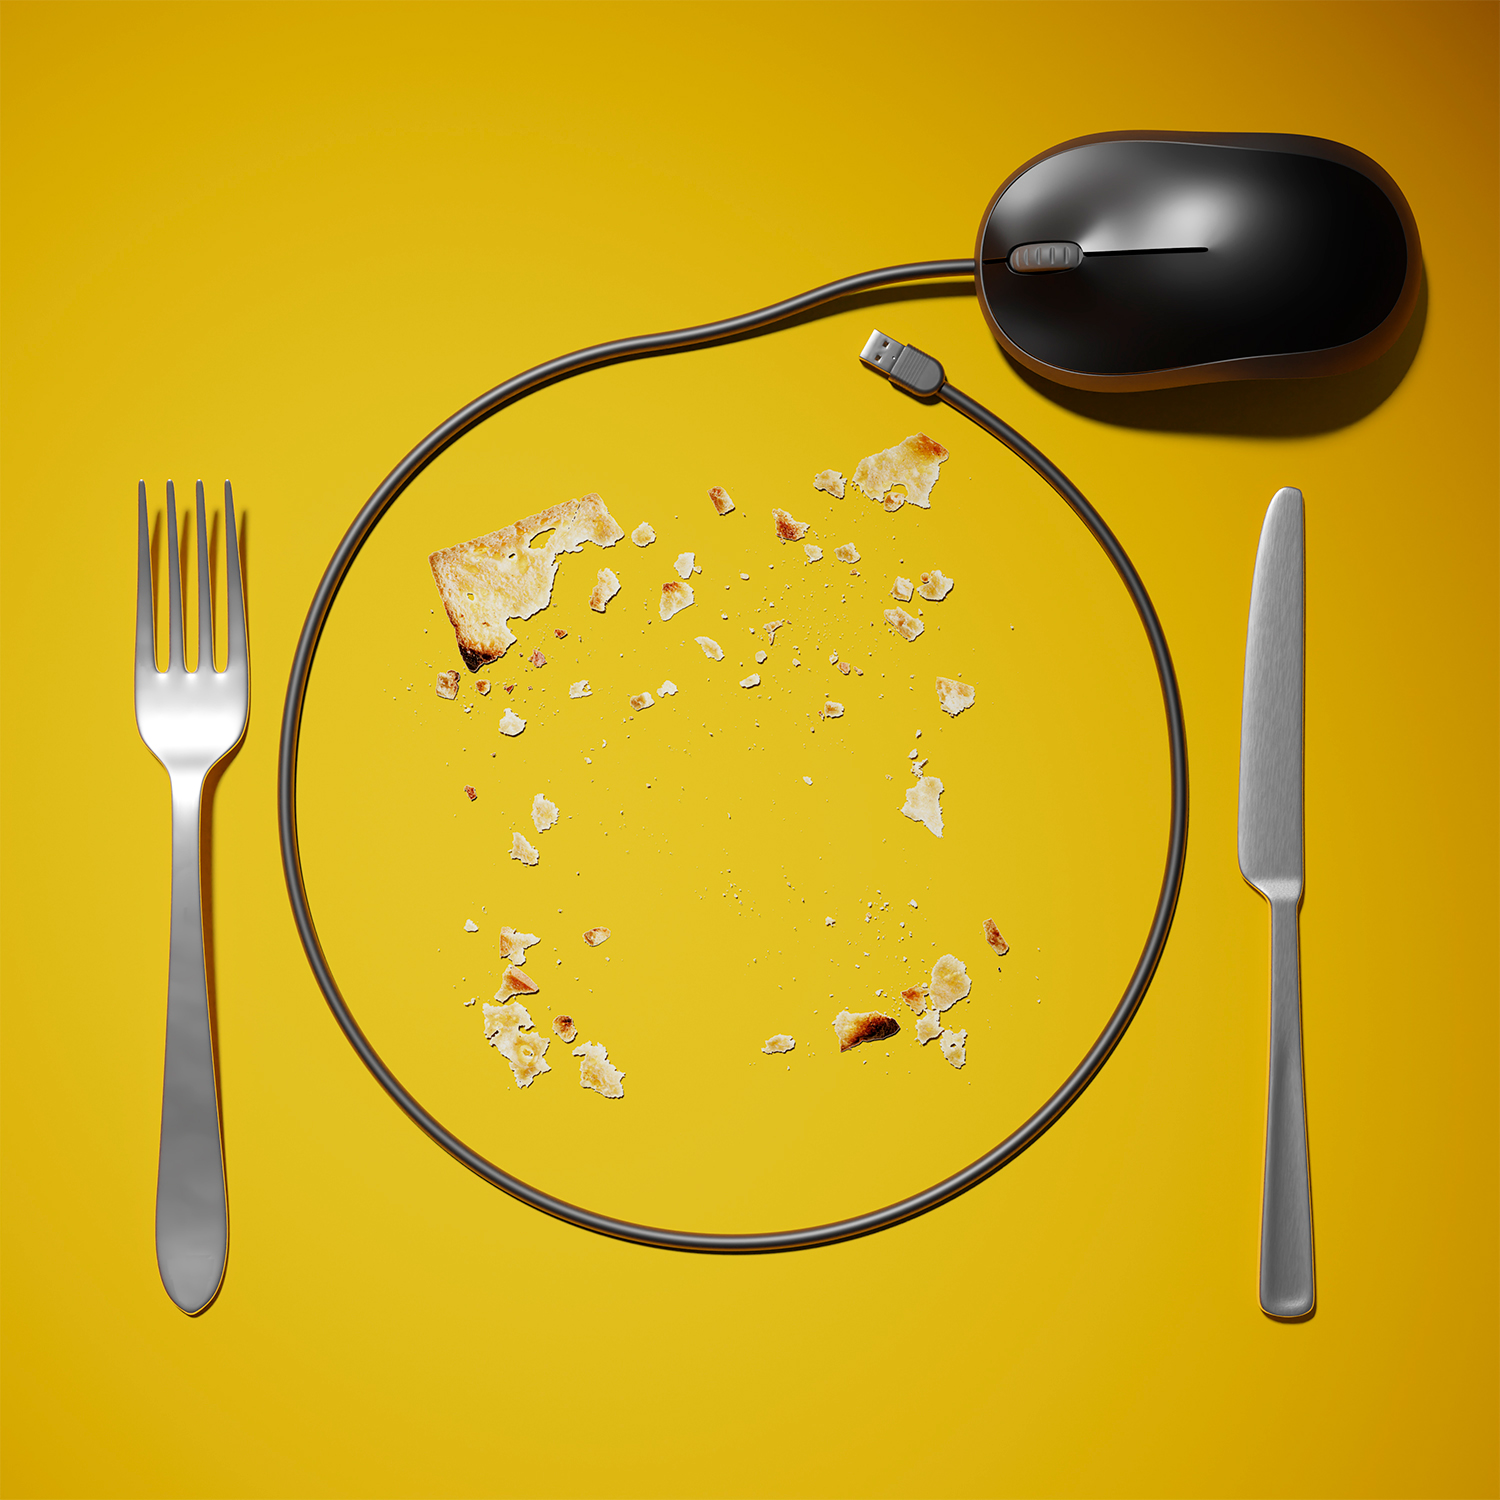 CGI mouse wire surrounding bread crumbs and a knife and fork